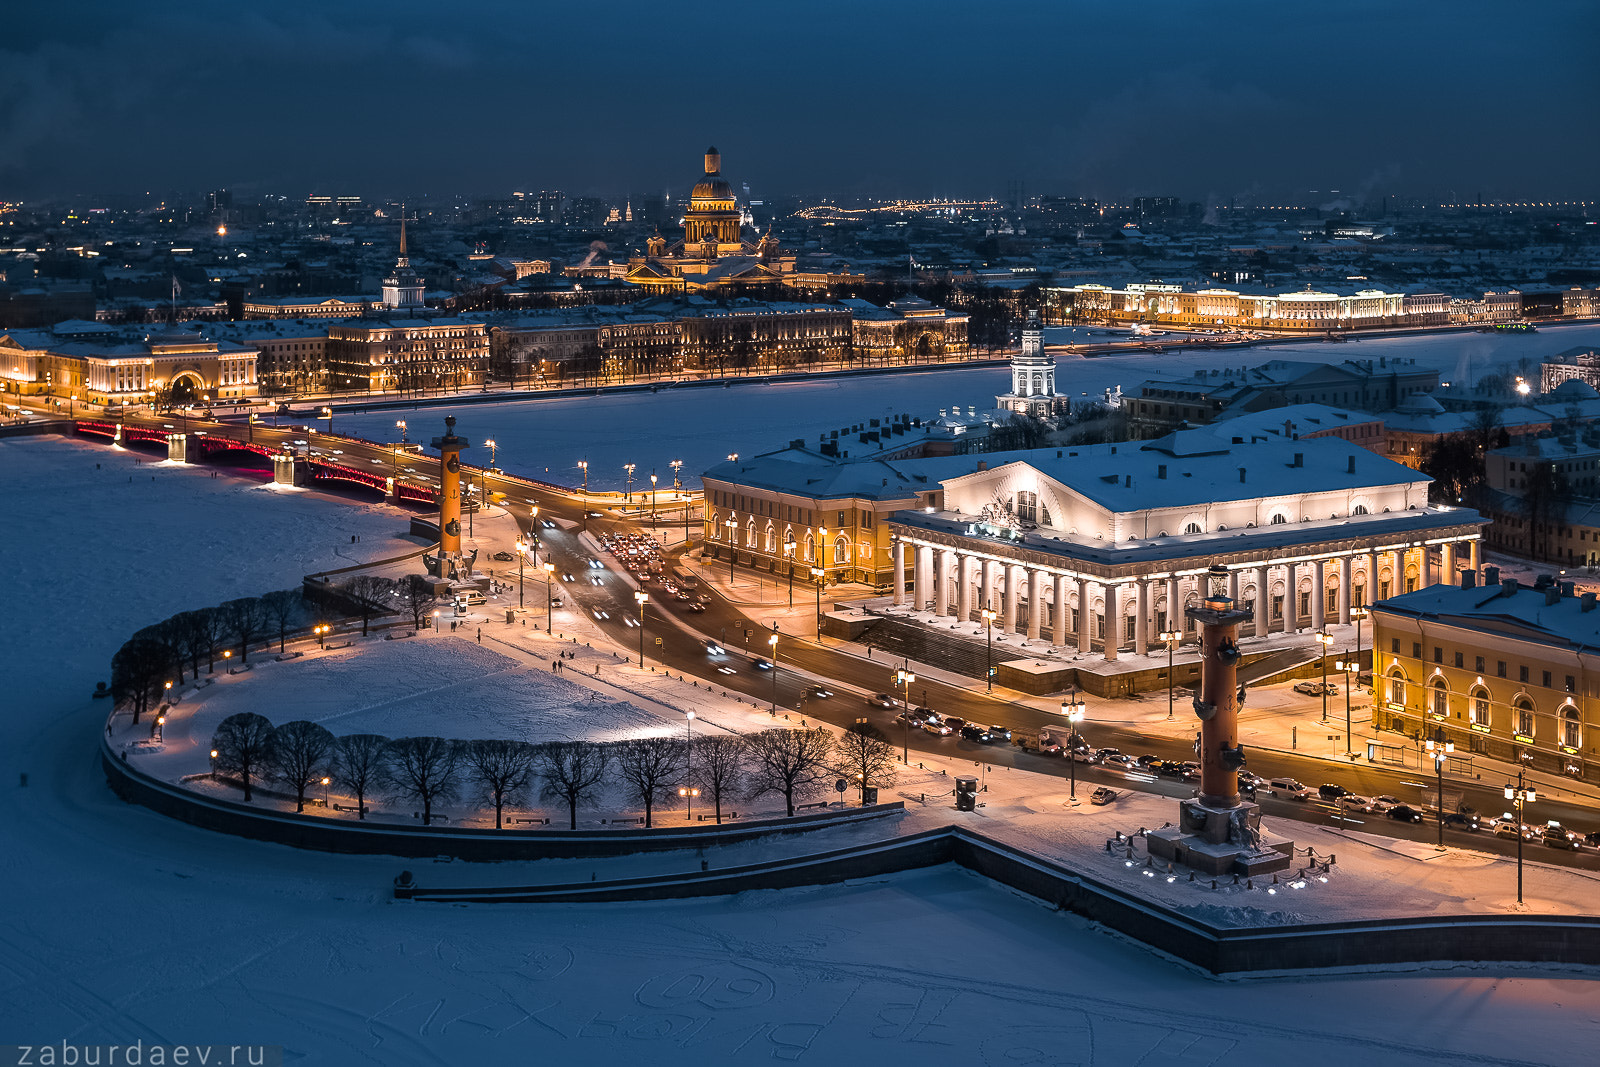 DJI FC6520 sample photo. Old saint petersburg stock exchange and rostral columns photography